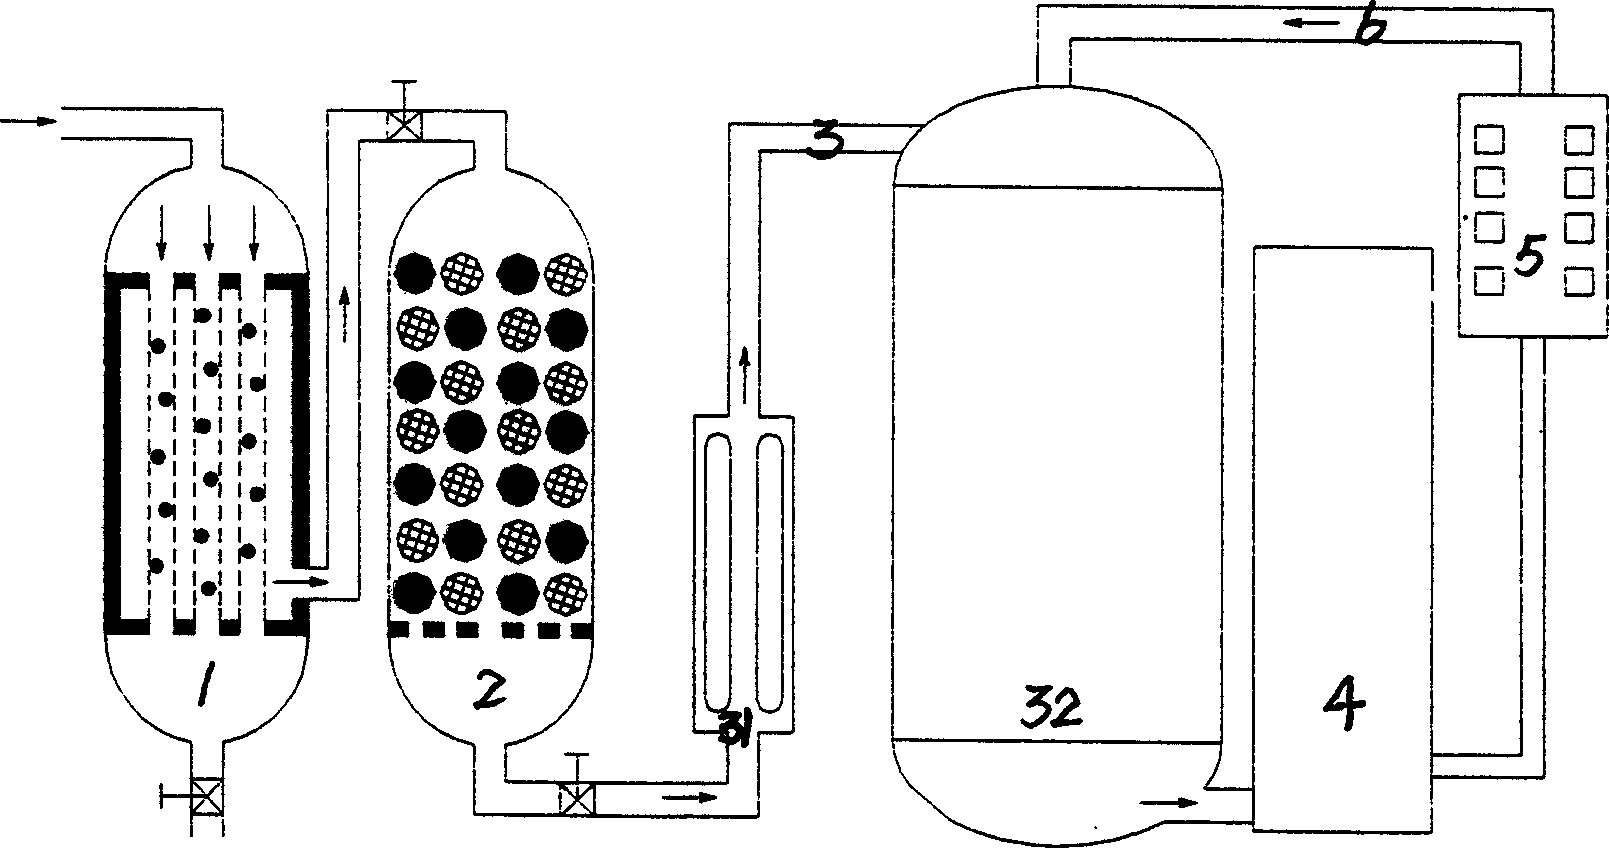 Nano based purification system for supplying high-quality water